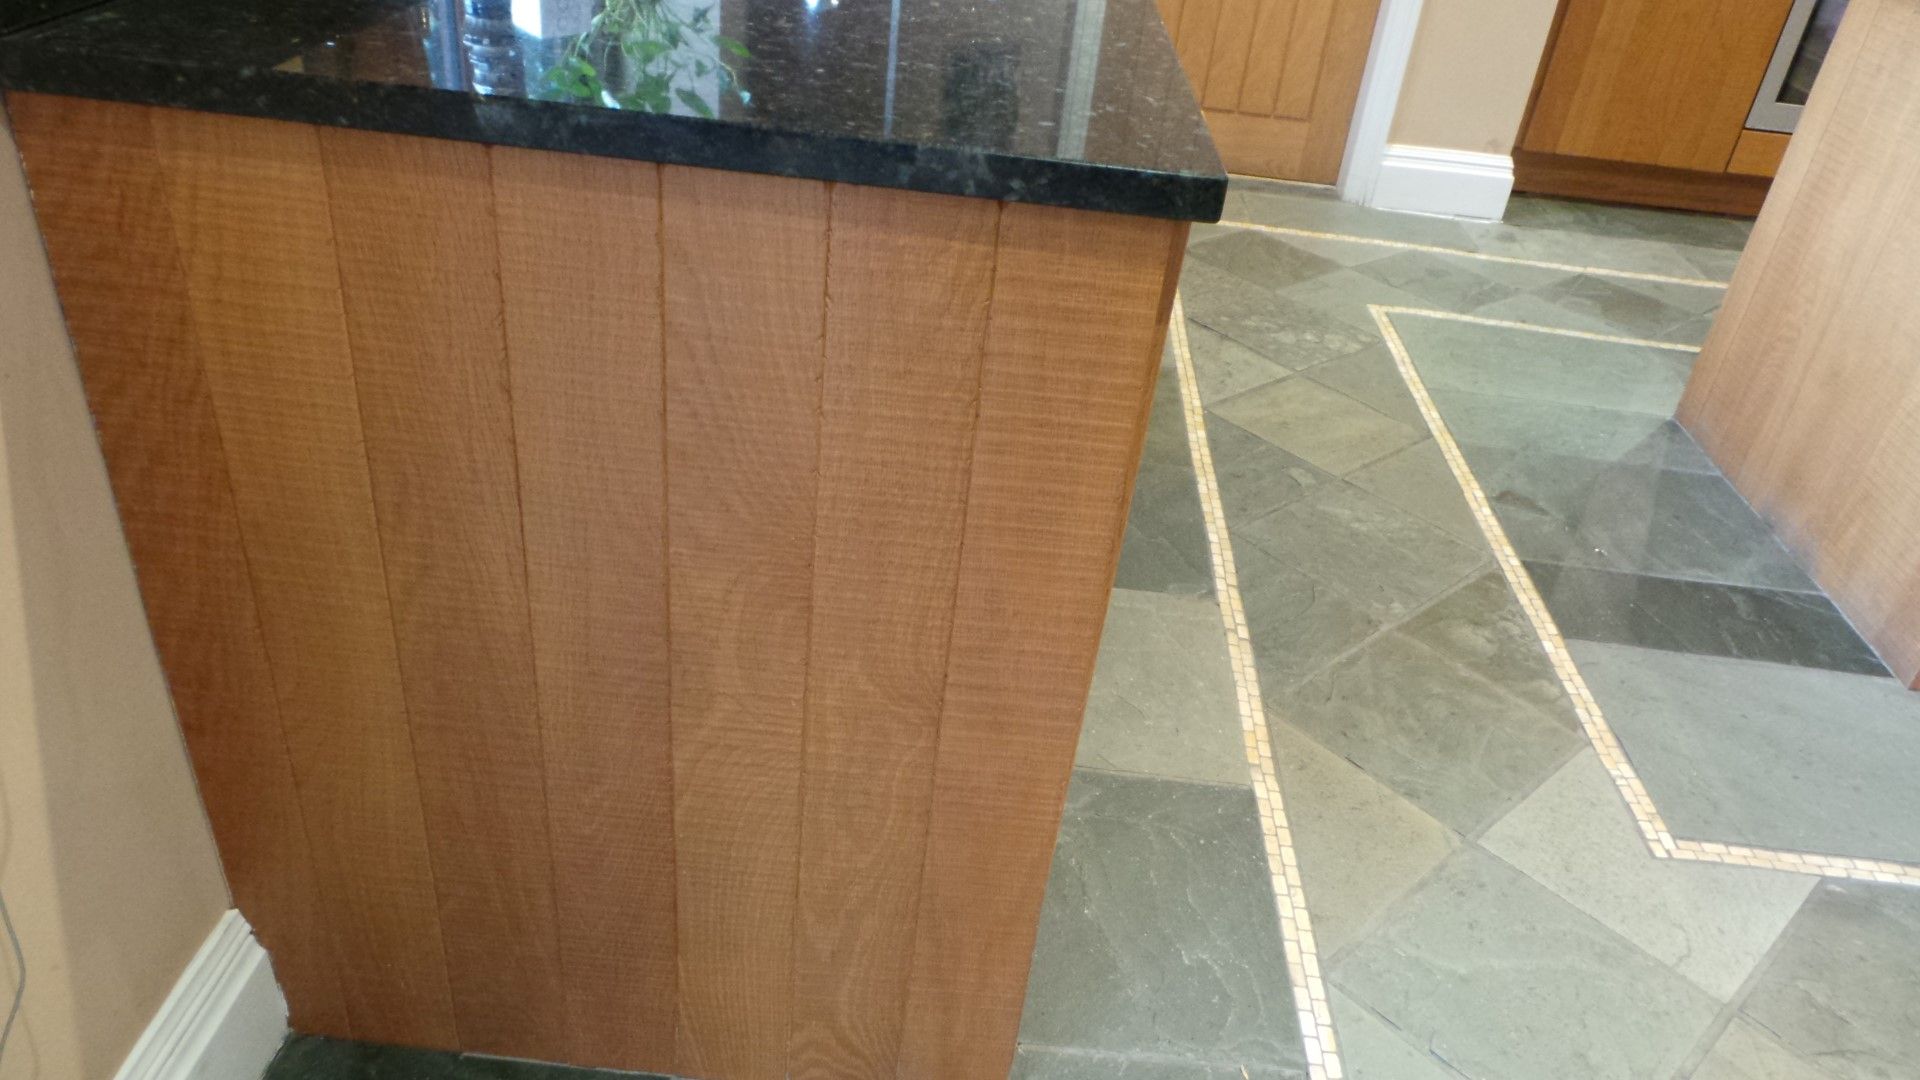 1 x Beautifully Crafted Bespoke Johnson & Johnson Fitted Kitchen - Rustic Solid Oak Doors, Modern - Image 18 of 86